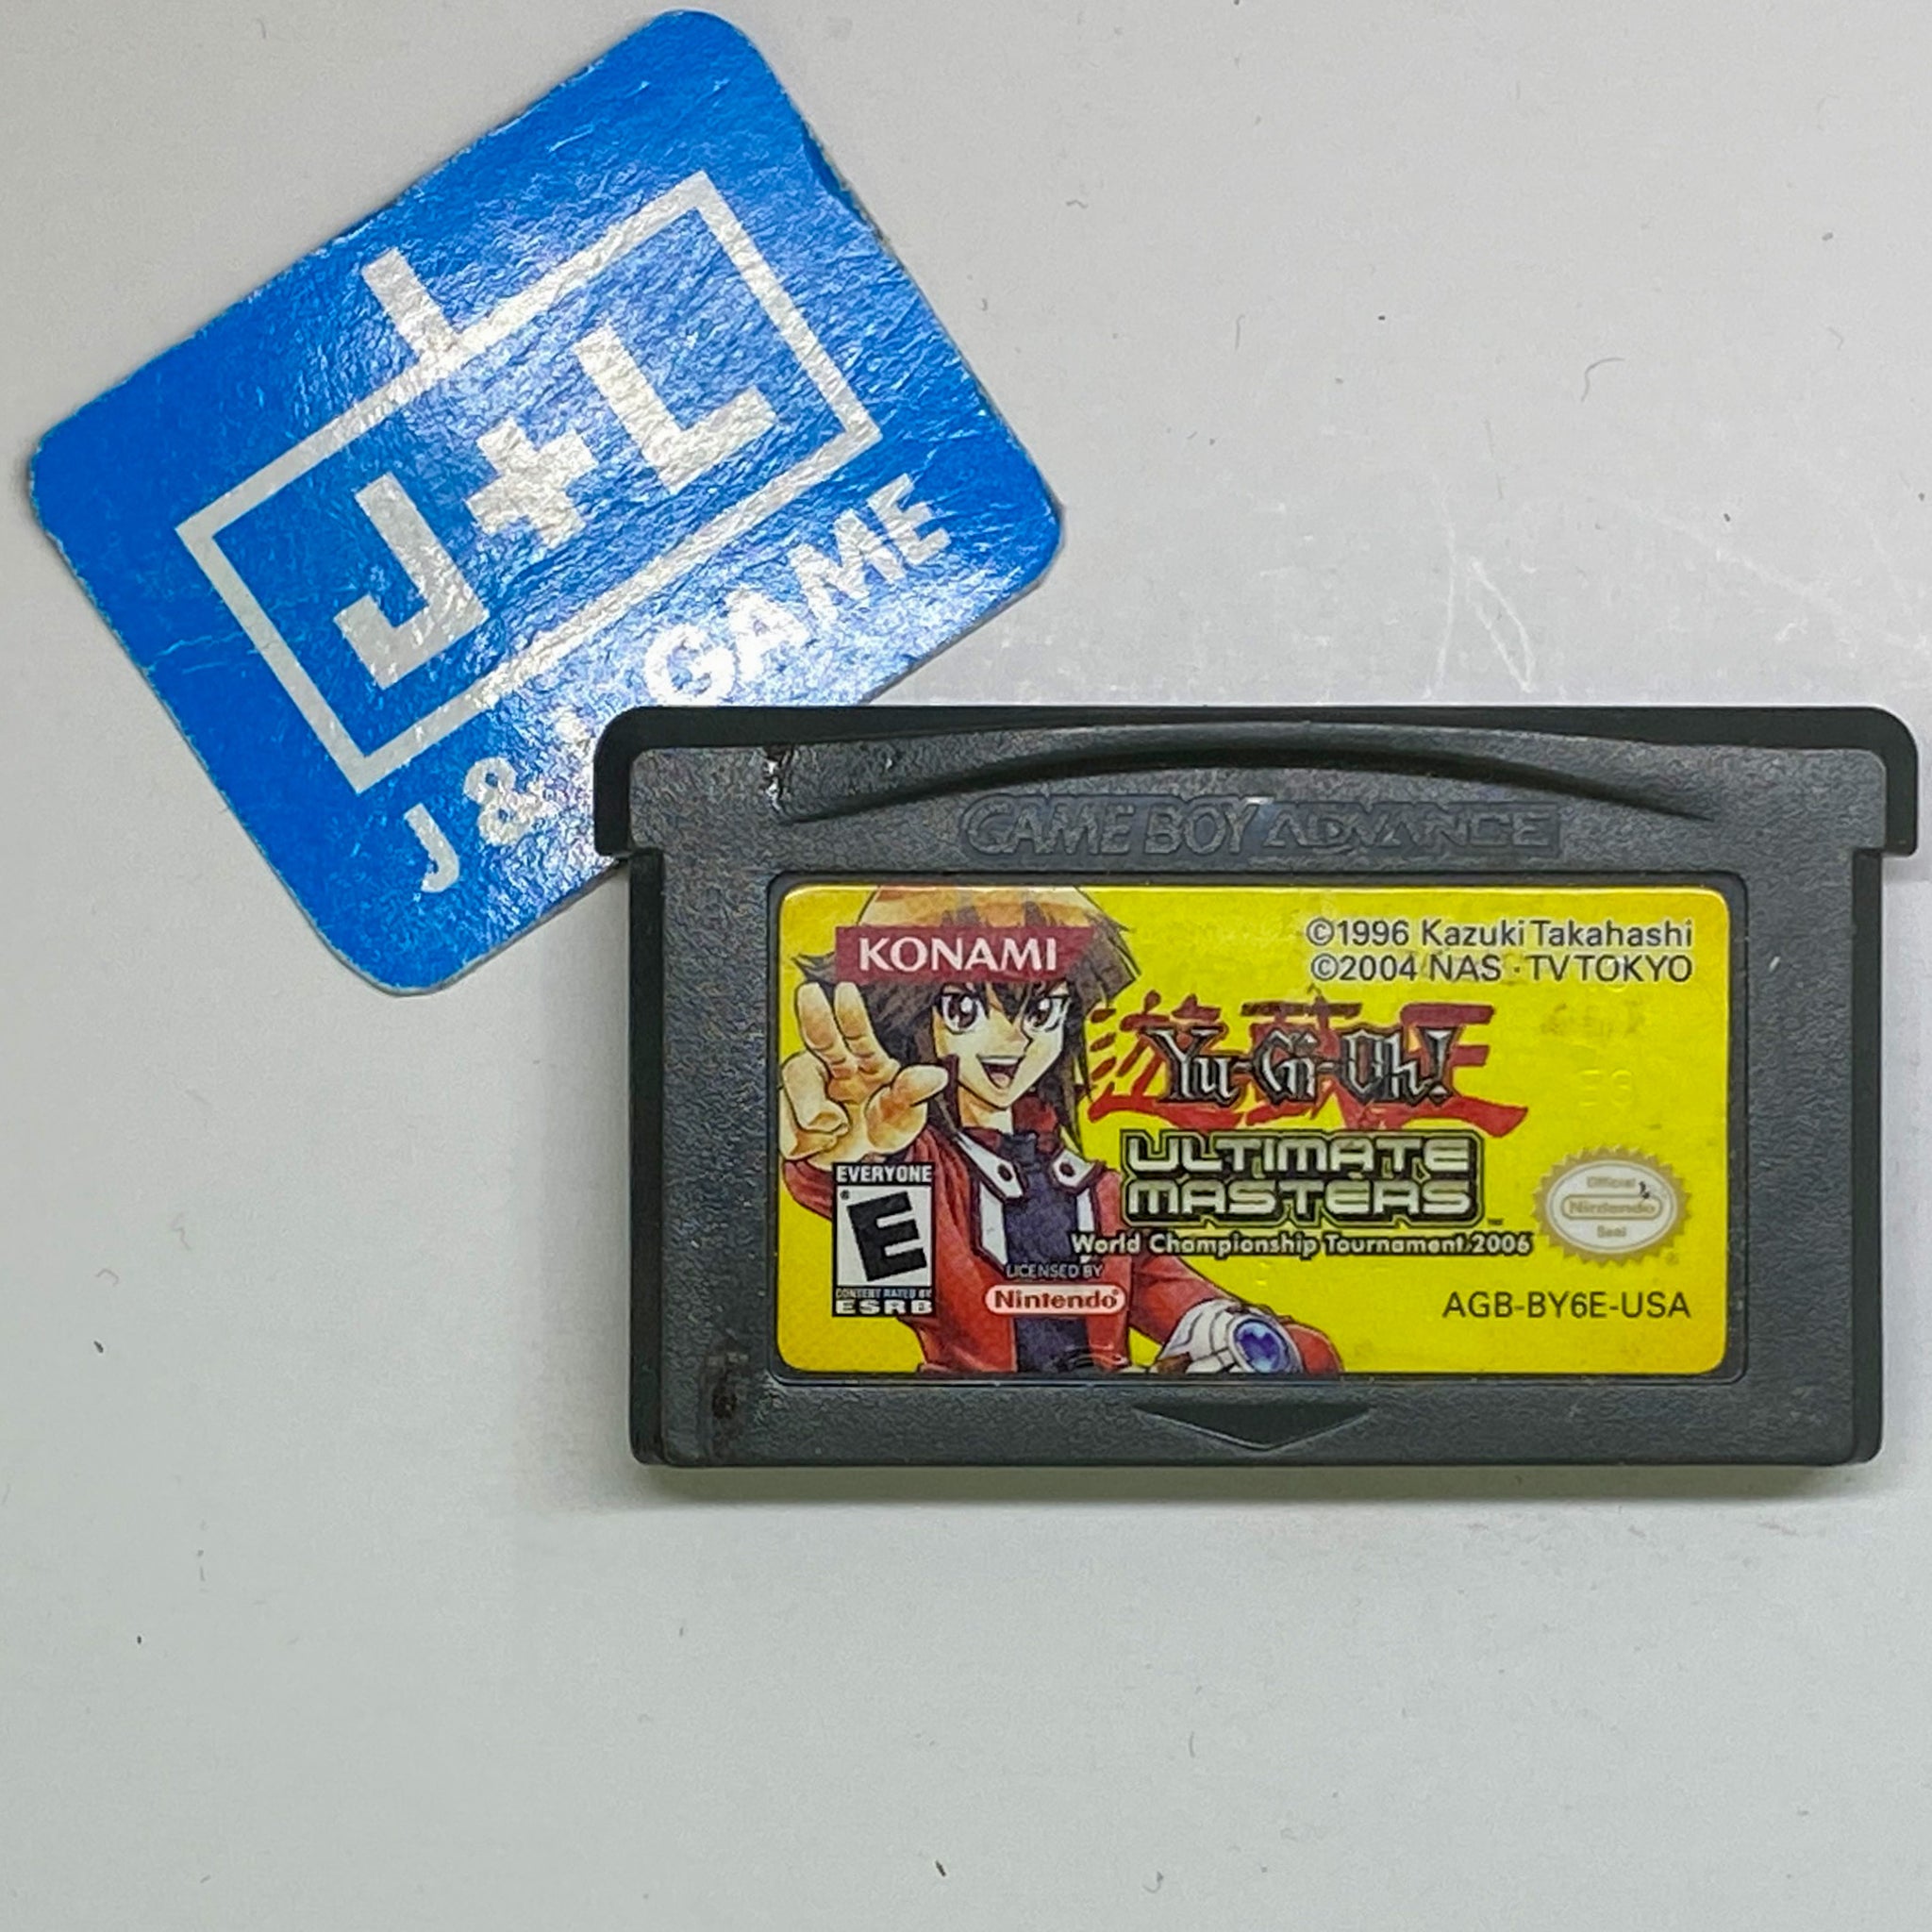 Ultimate Card Games (Nintendo Game Boy Advance, 2004) for sale online